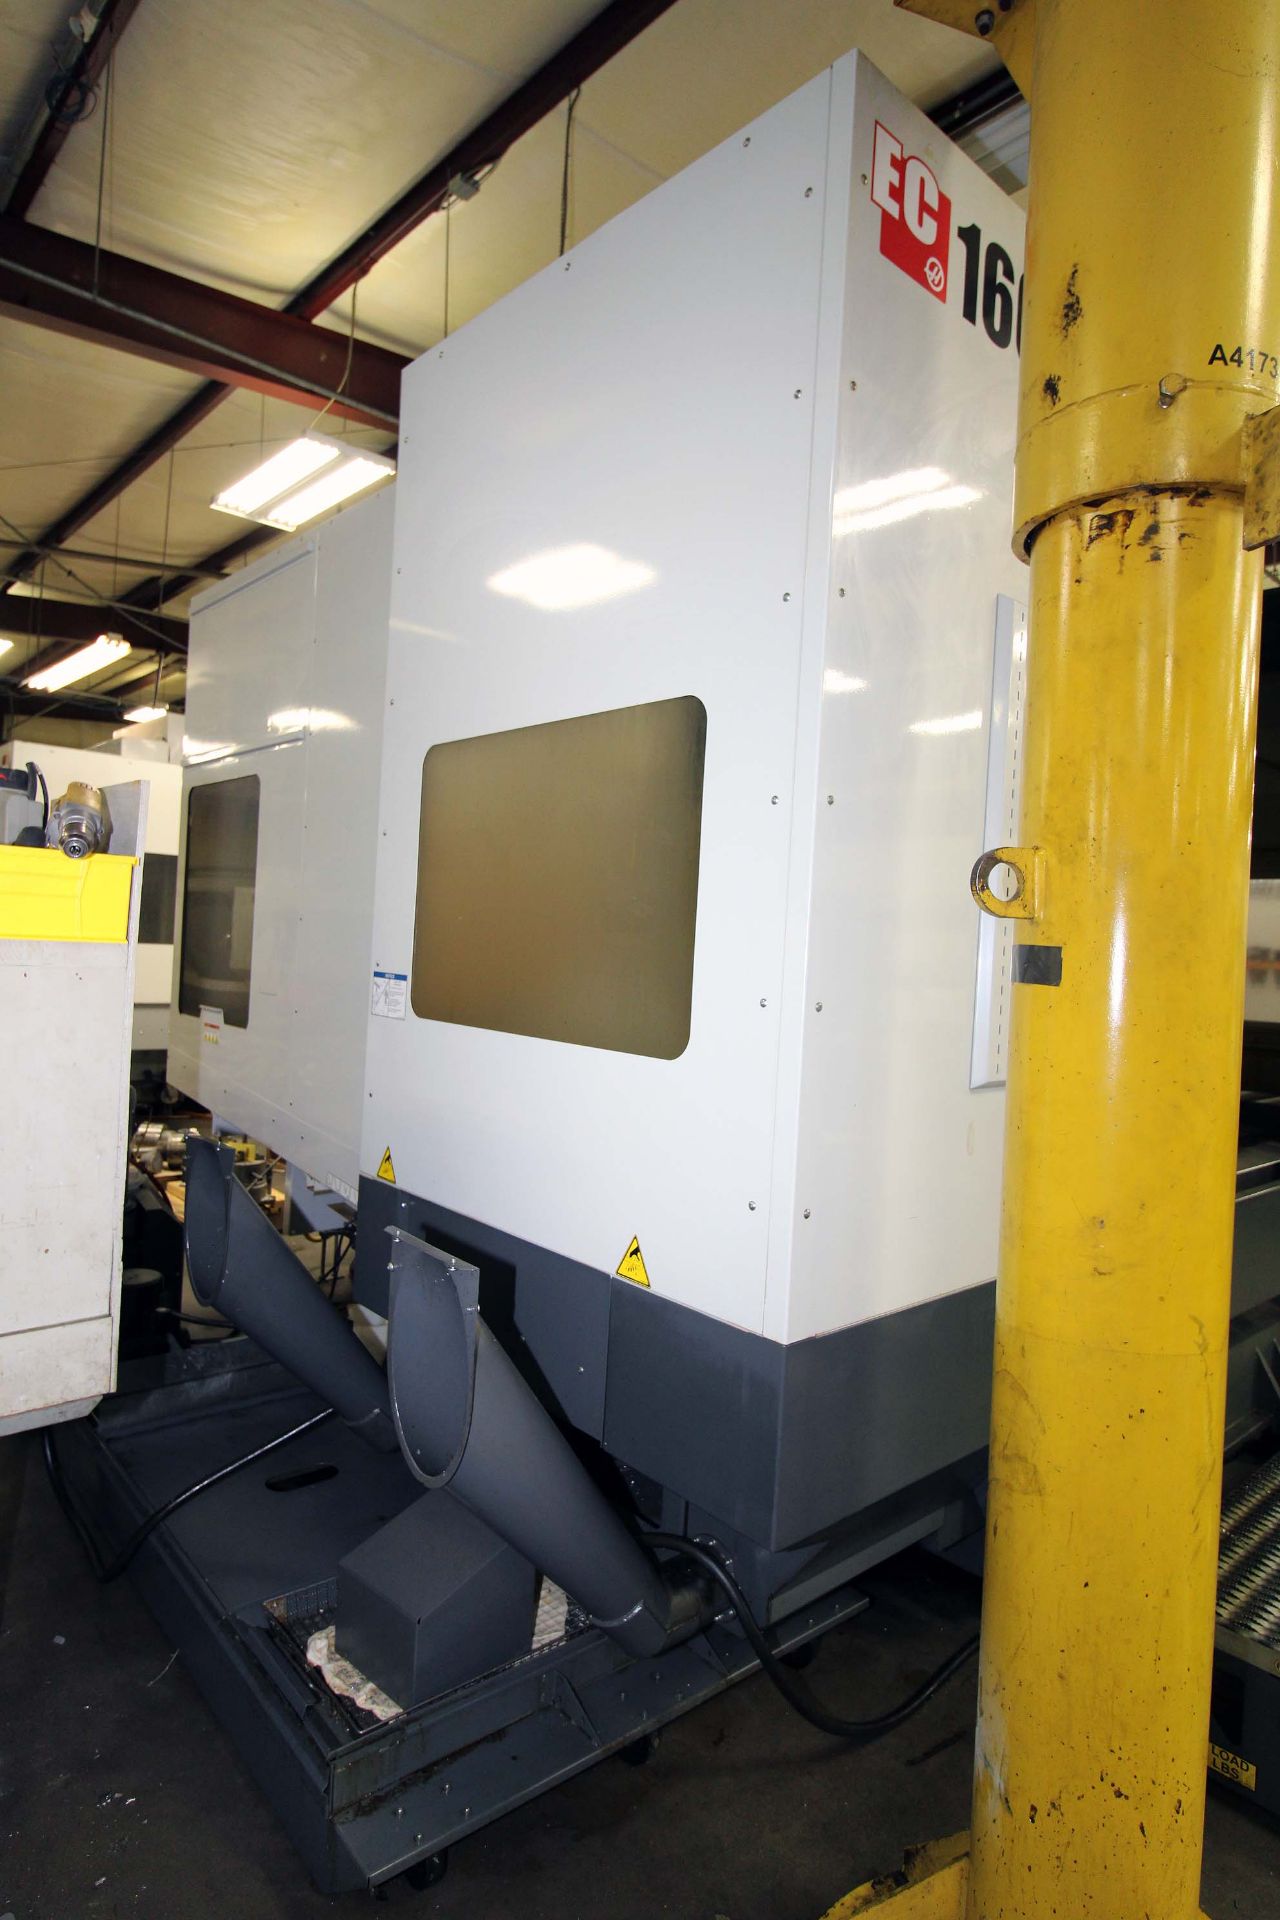 4-AXIS HORIZONTAL MACHINING CENTER, HAAS MDL. EC1600, new 10/2012, 64” x 36” table, 30” built-in - Image 13 of 14